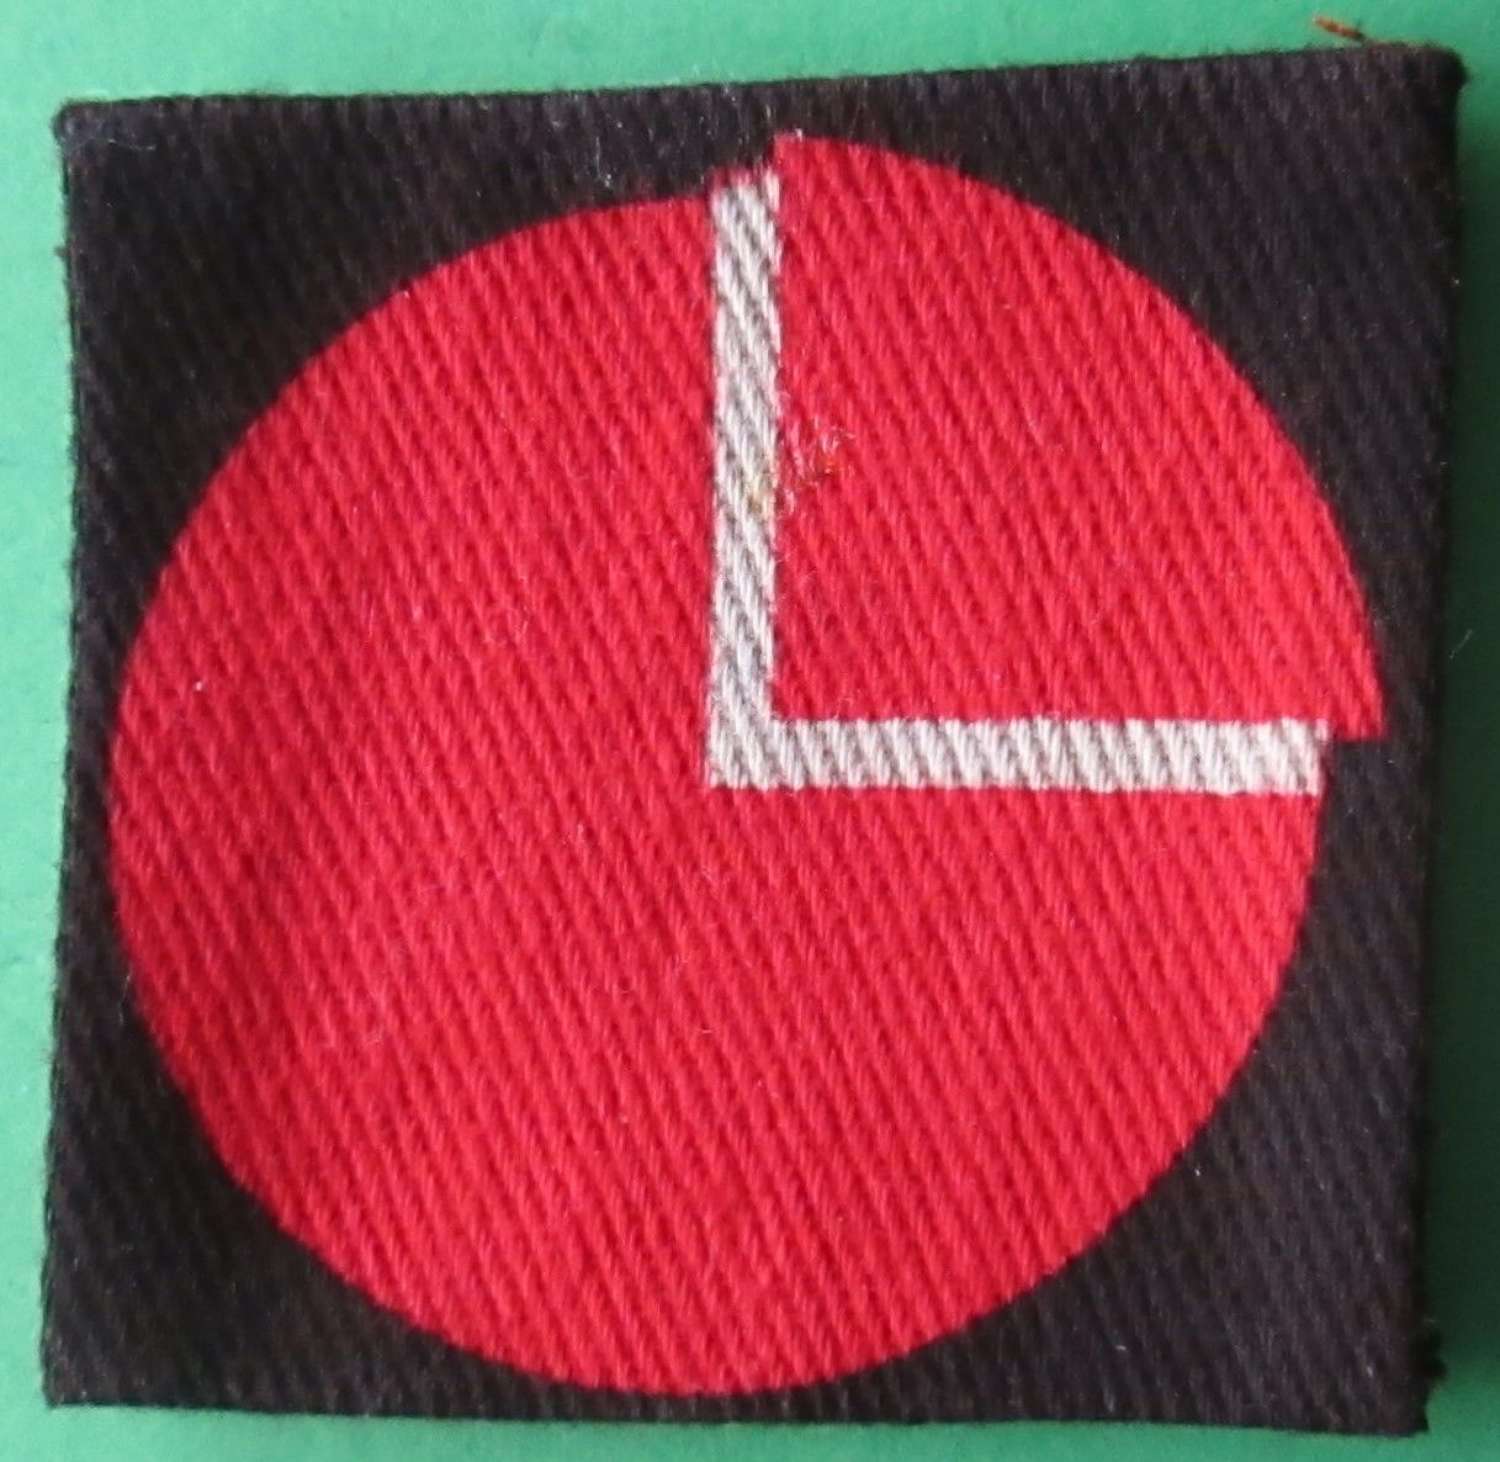 A 4TH INFANTRY DIVISION,3RD PATTERN FORMATION SIGN